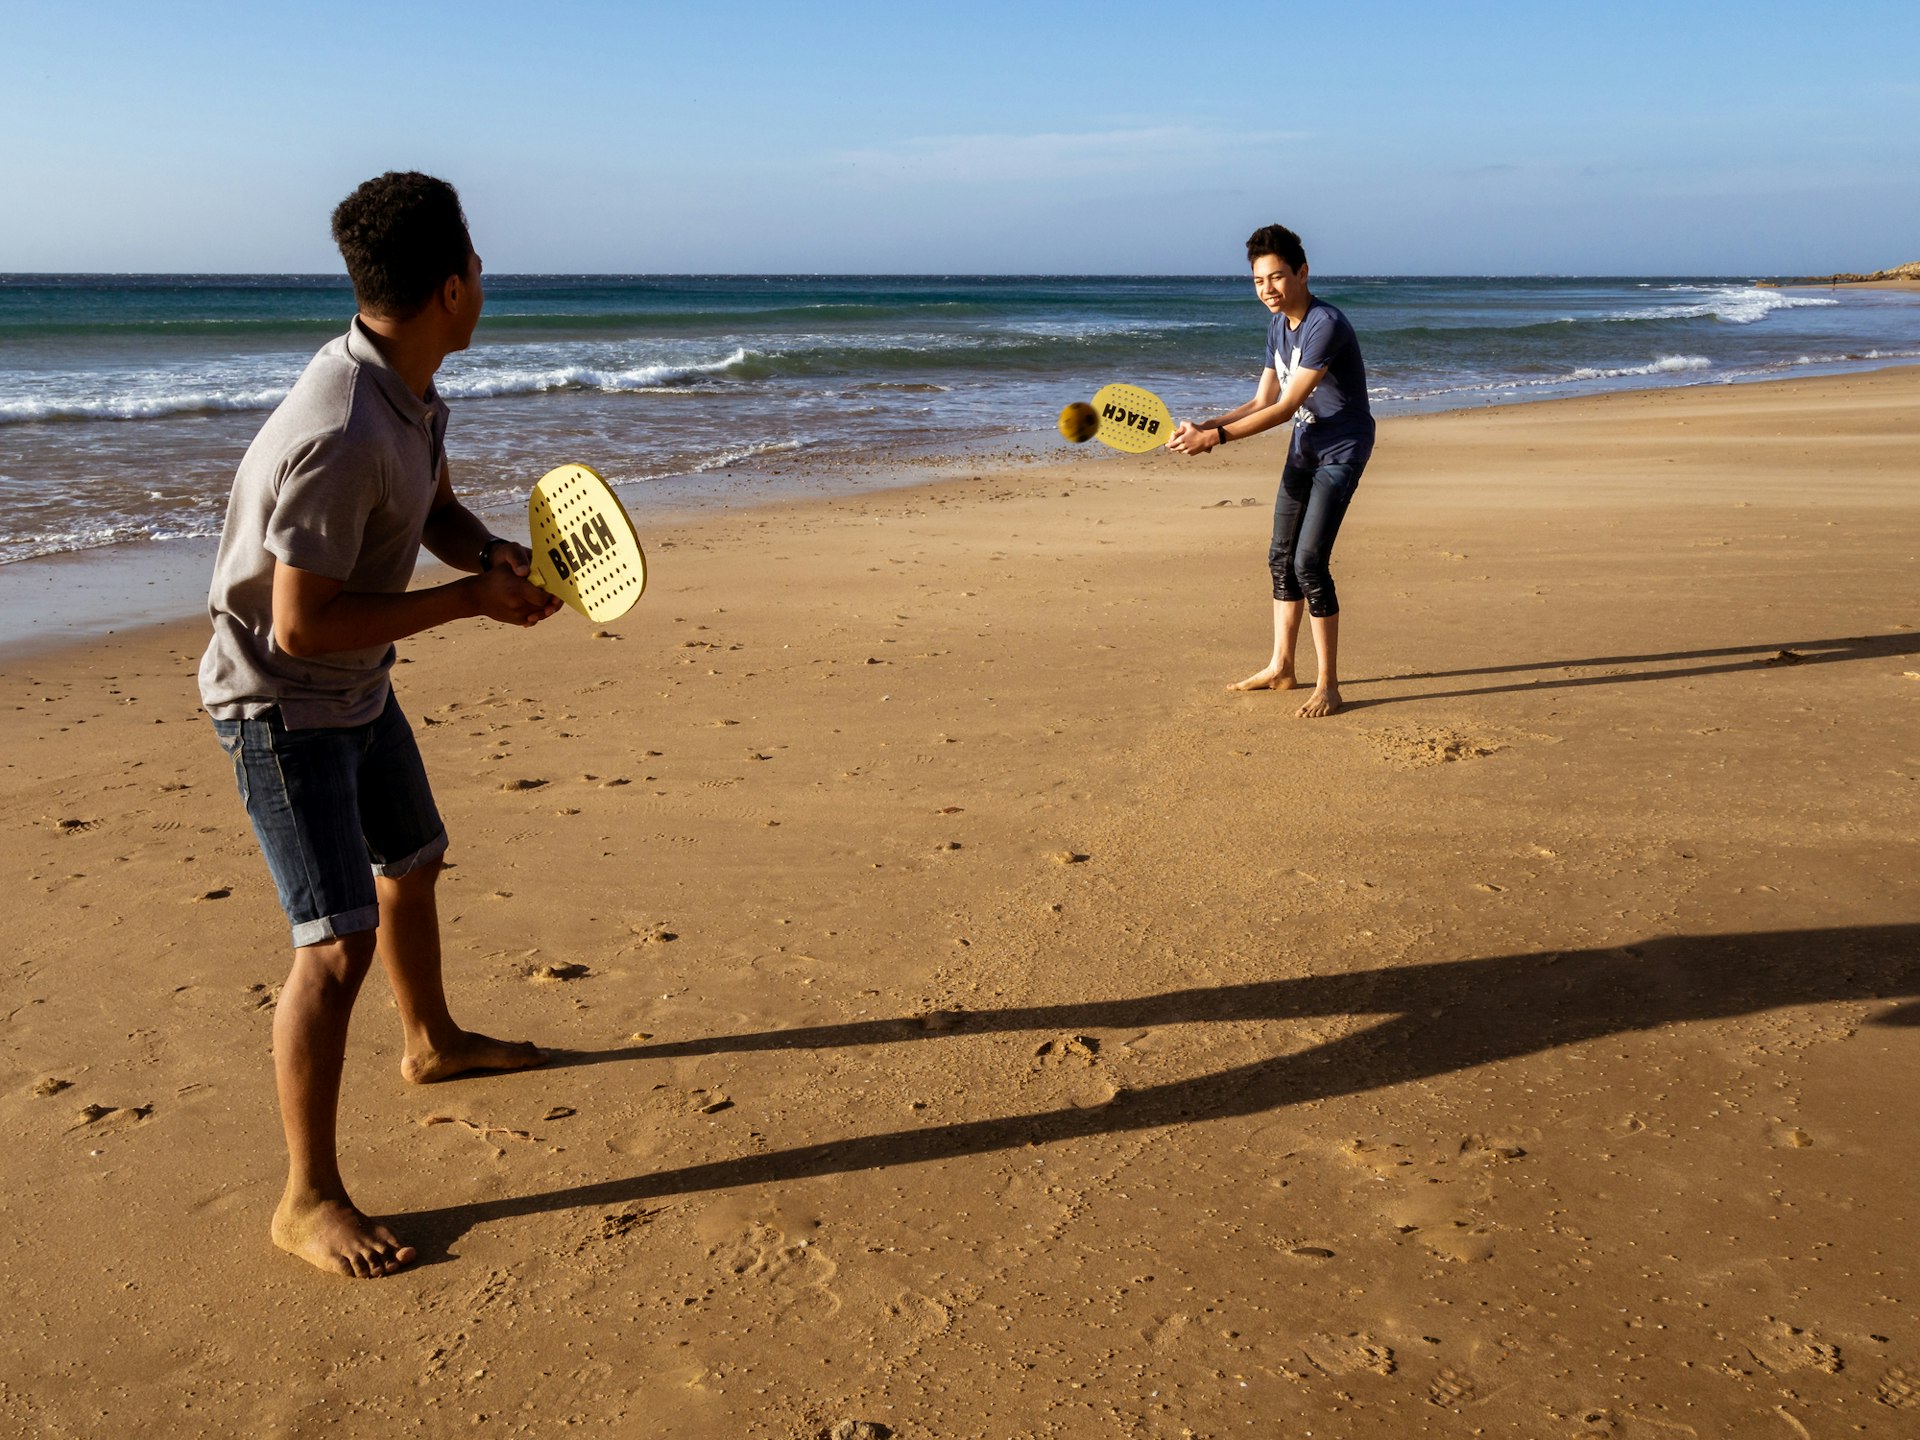 Two smiling teens play racket ball on the orange sand of Achakar beach in Tangier, Morocco